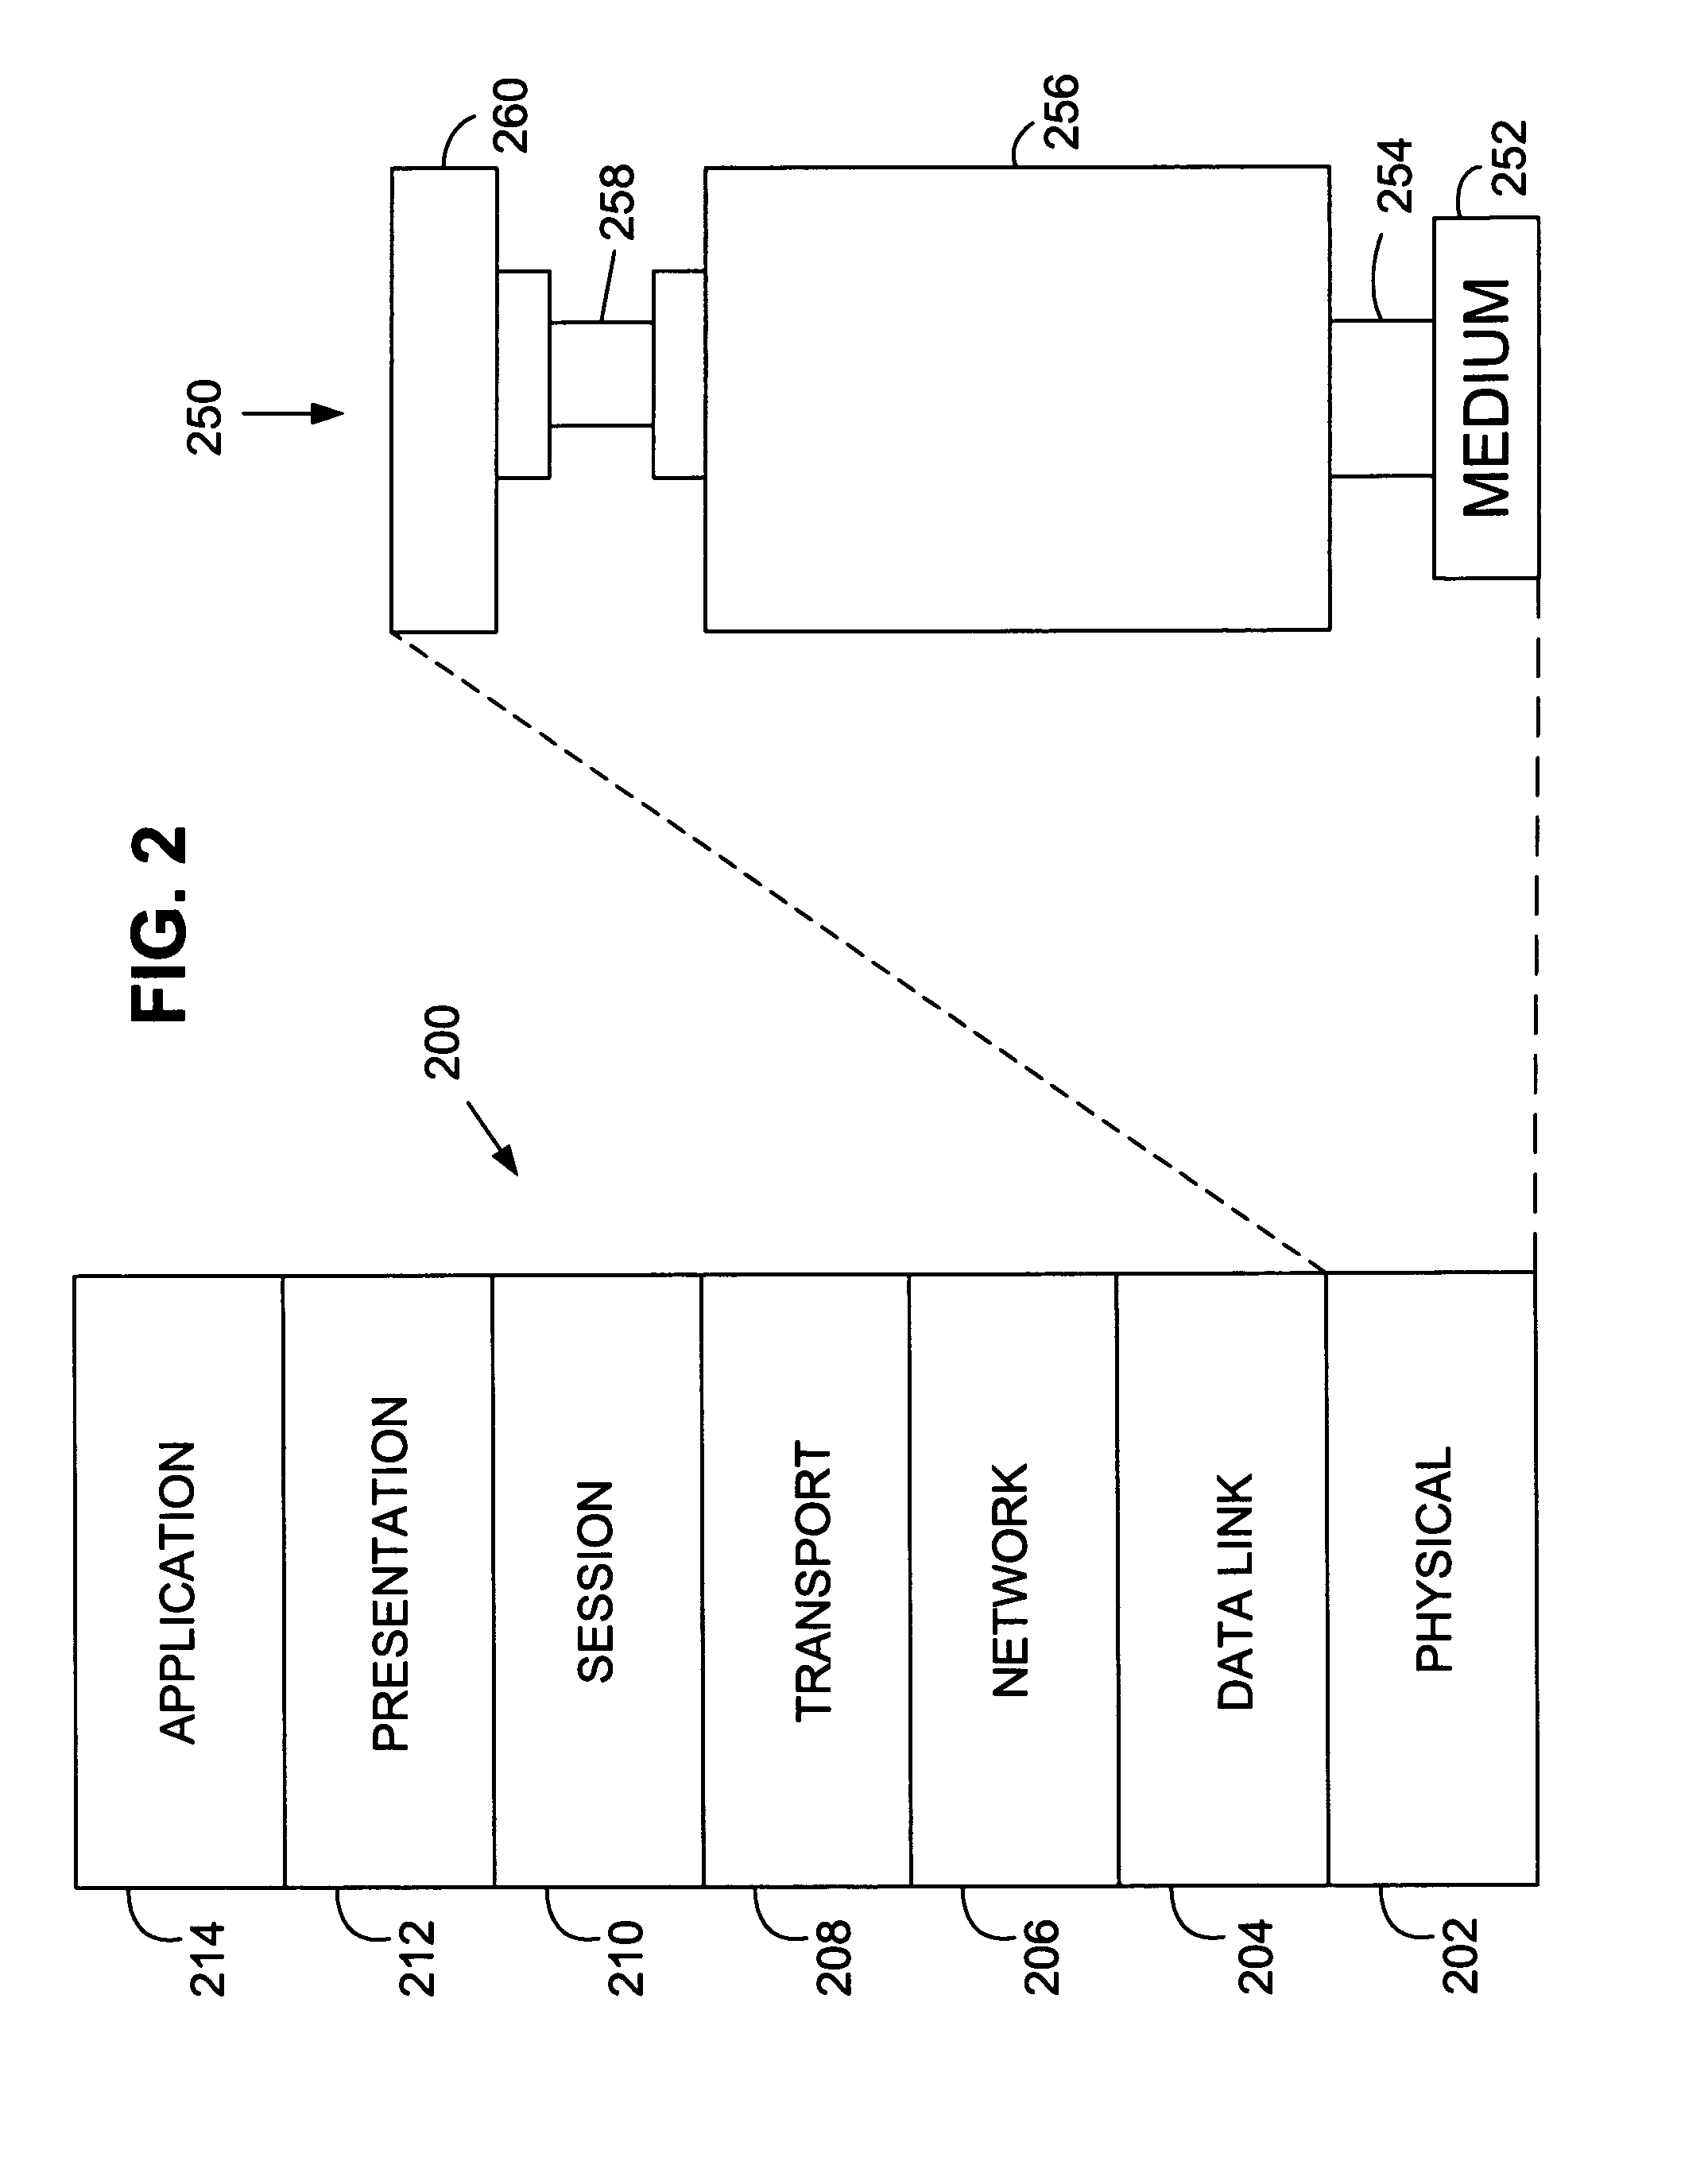 Method and apparatus for performing wire speed auto-negotiation